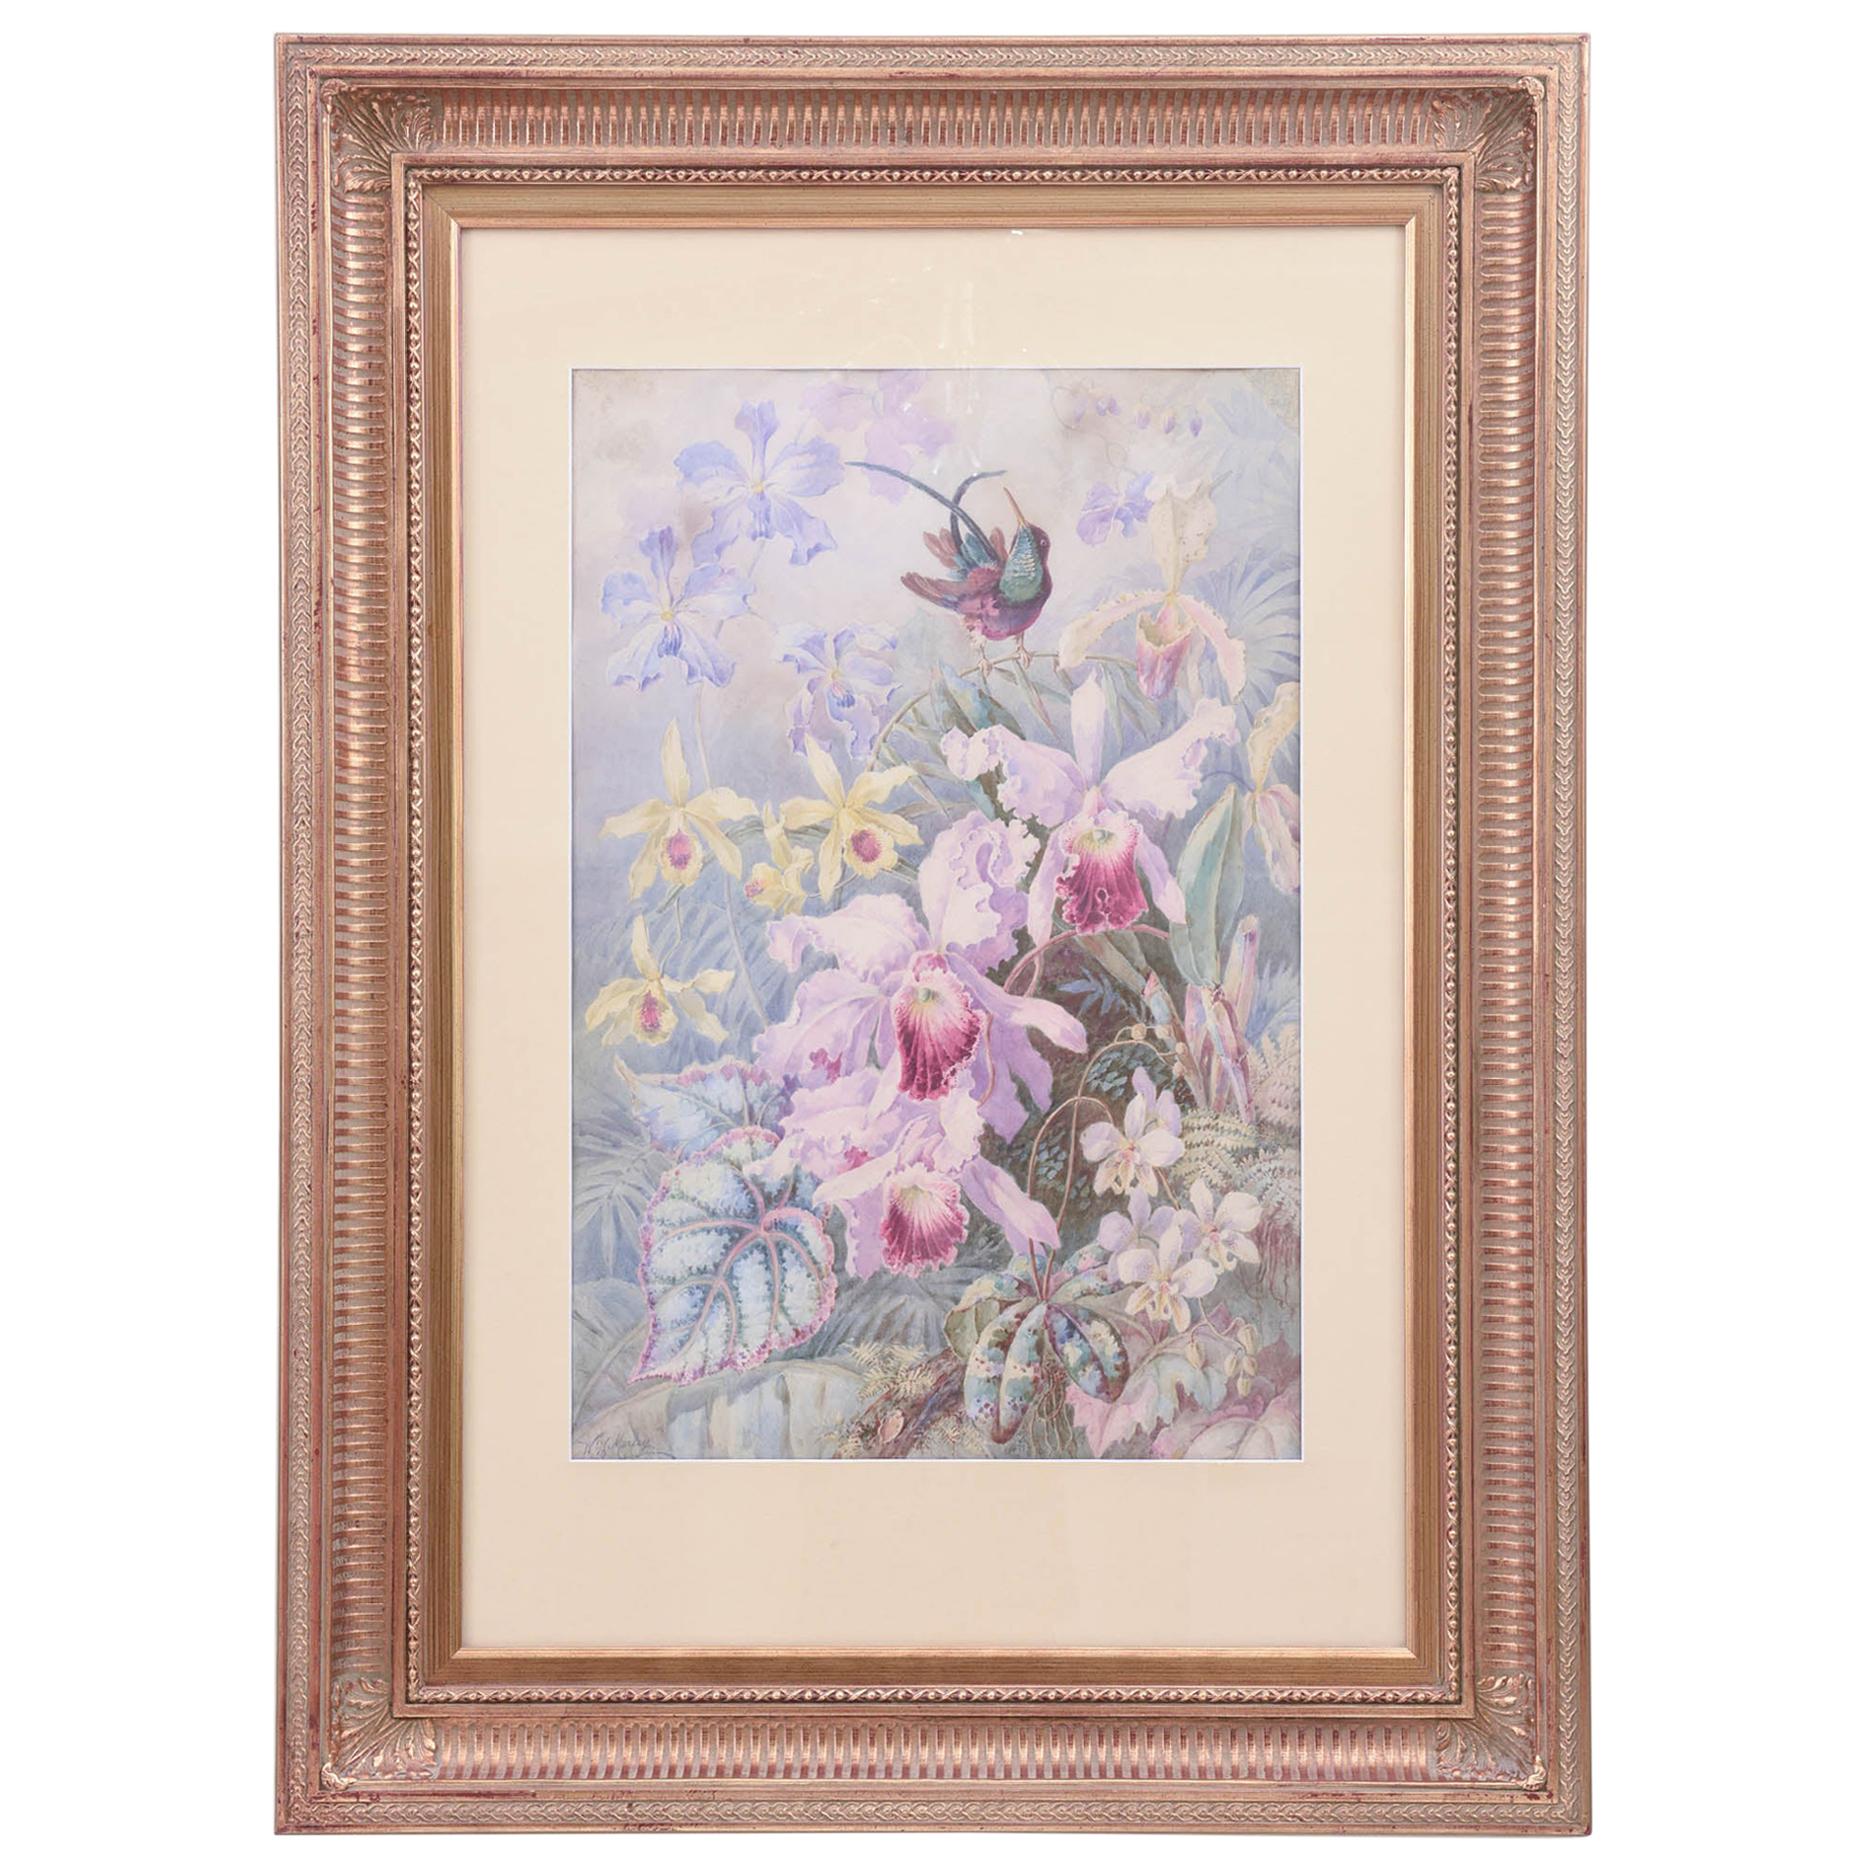 Exquisite Orchid & Hummingbird Watercolor by William Morley, Antique Oversize For Sale